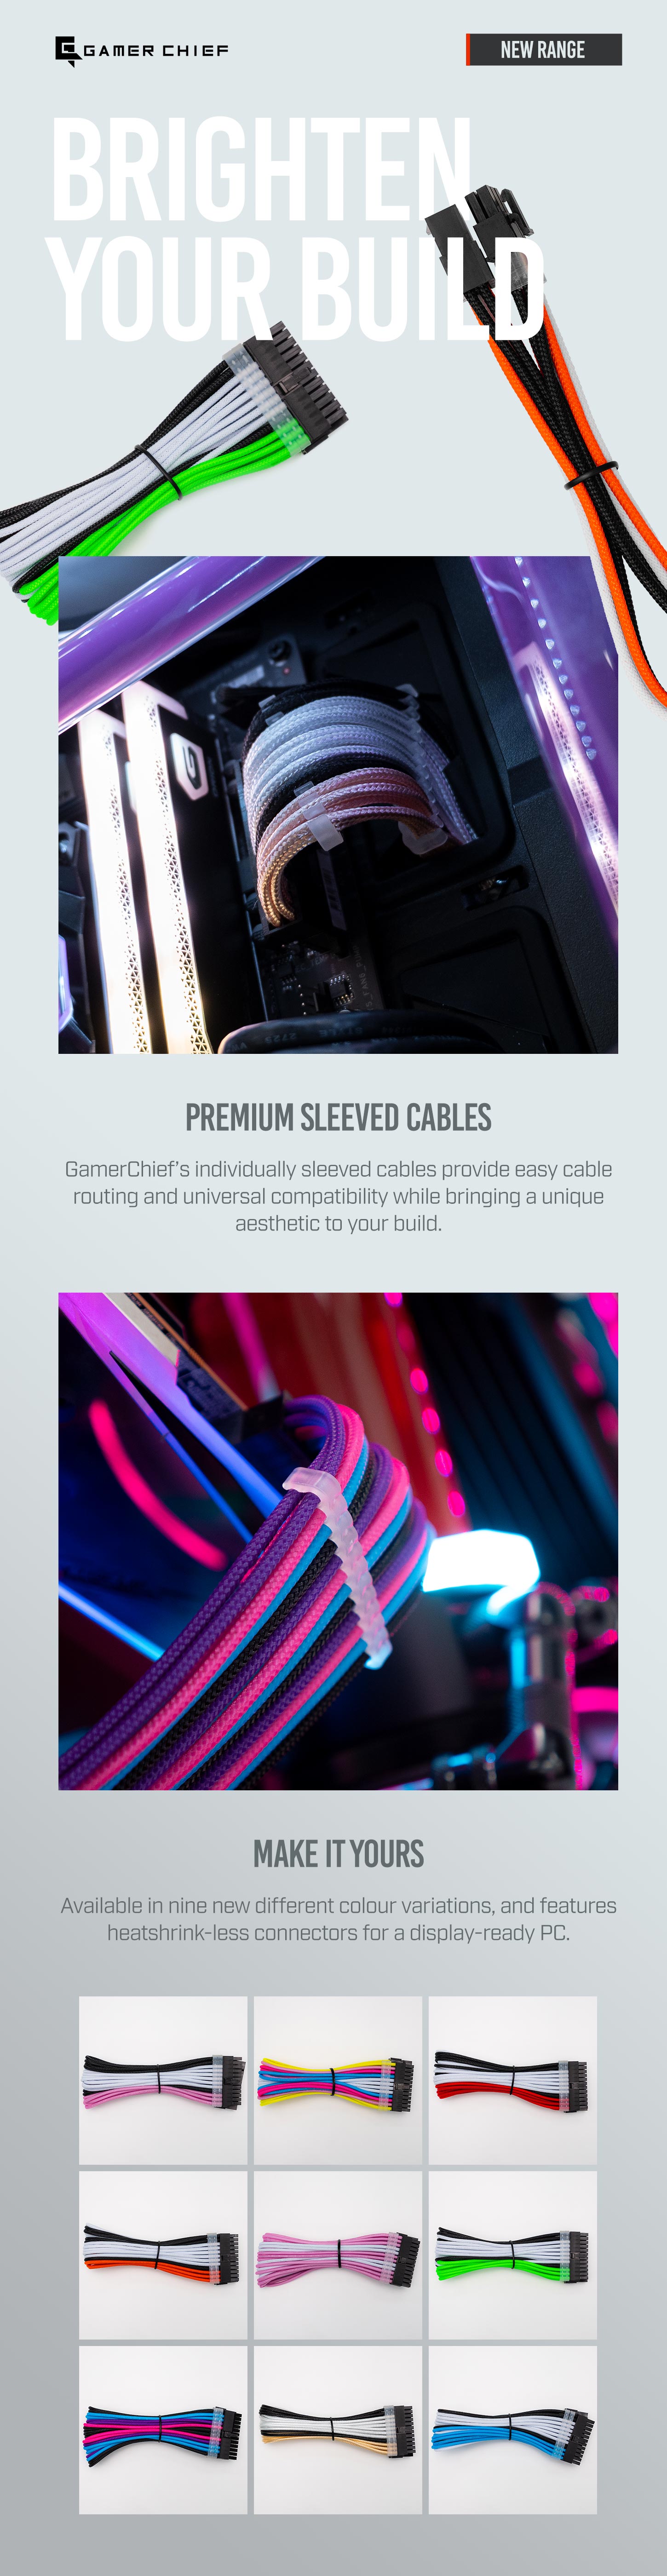 A large marketing image providing additional information about the product GamerChief Elite Series 8-Pin EPS 30cm Sleeved Extension Cable (Blue/White/Black) - Additional alt info not provided